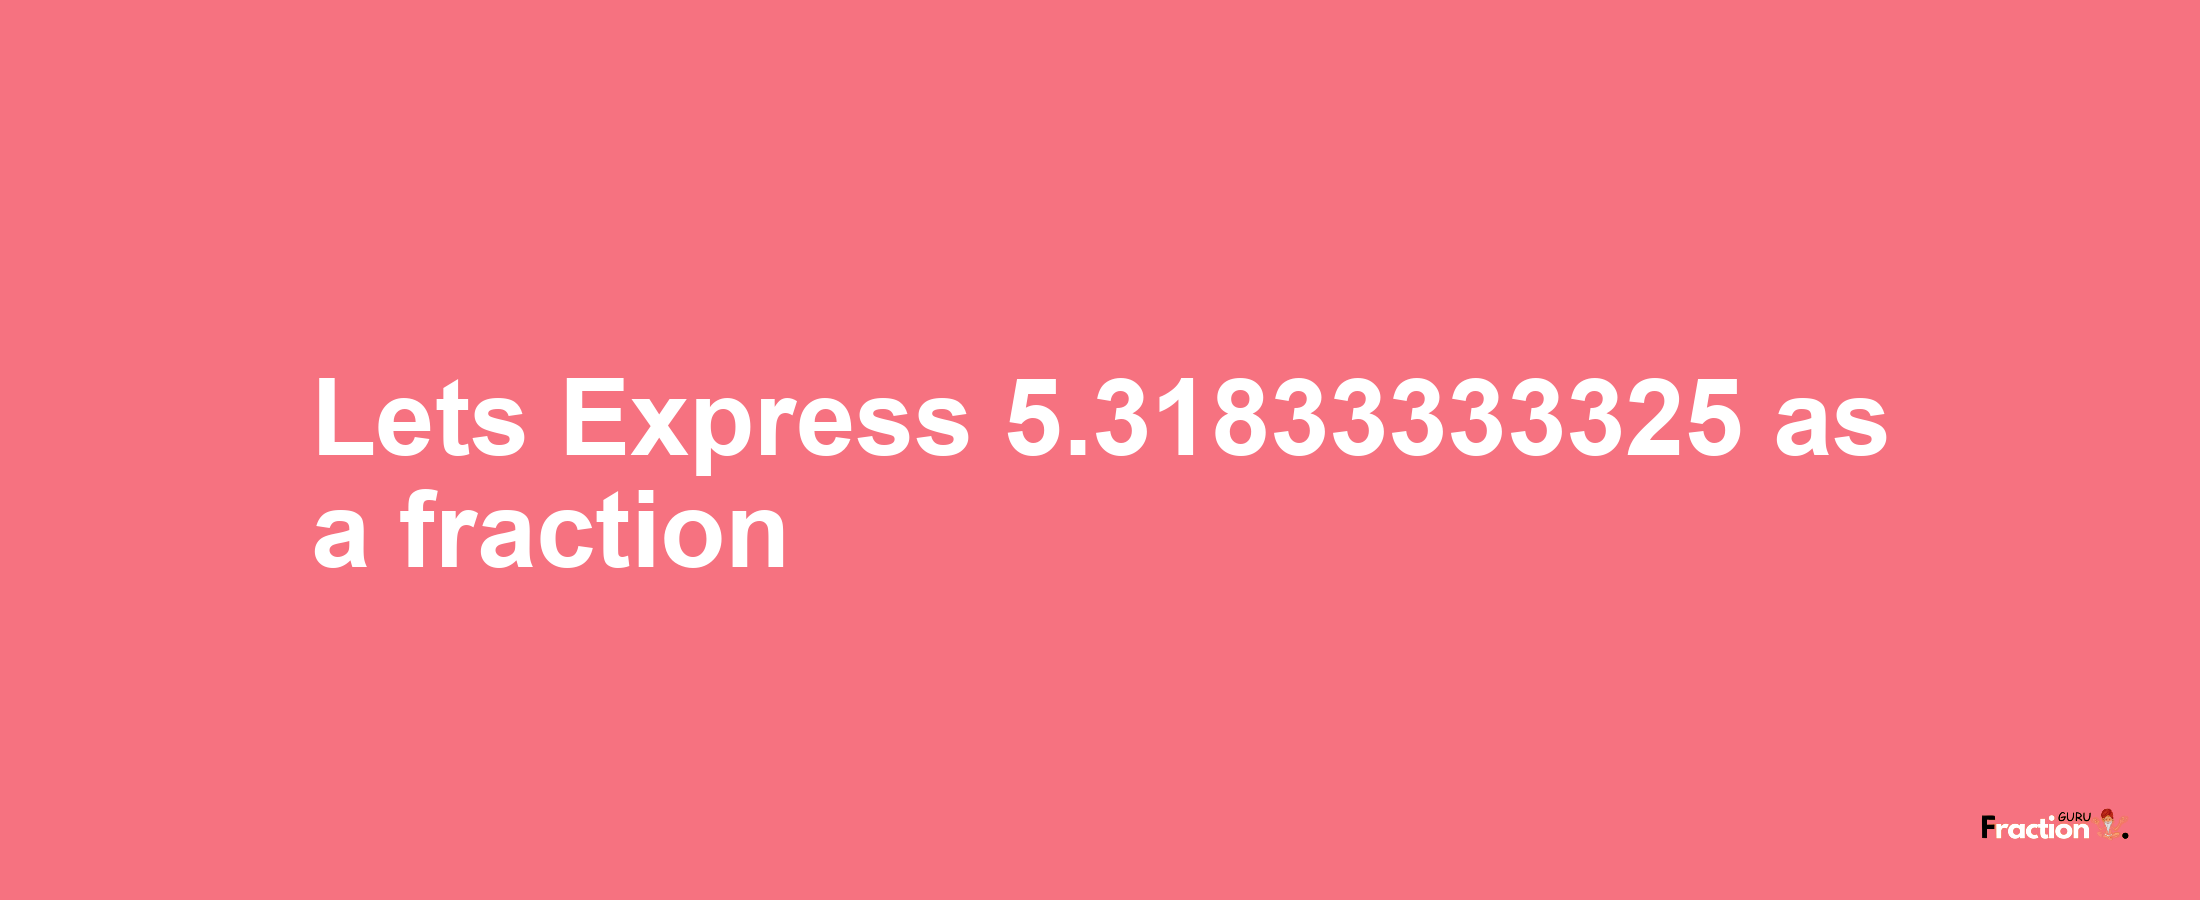 Lets Express 5.31833333325 as afraction